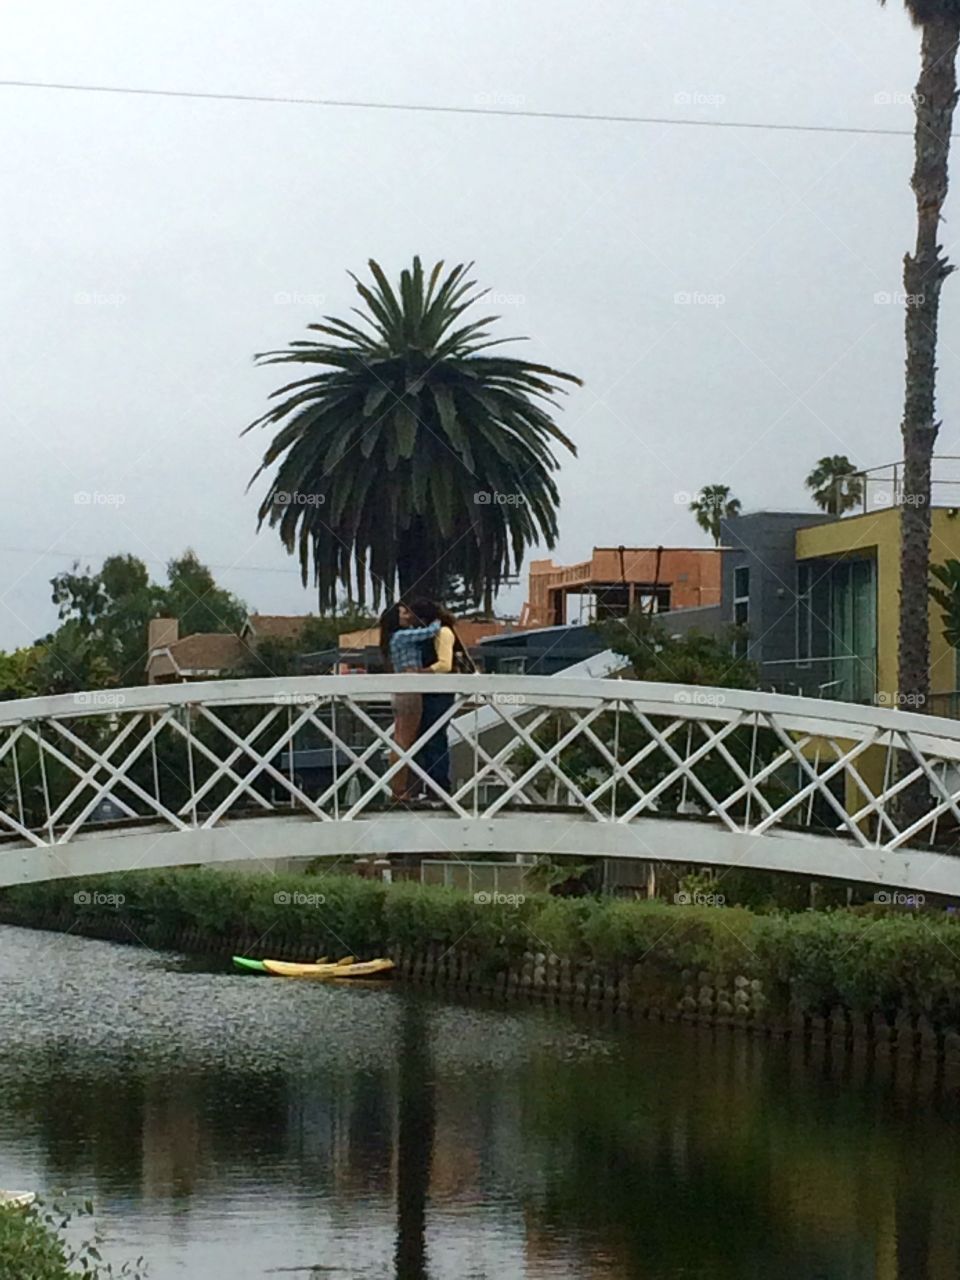 Venice is for lovers. Couple kissing on a bridge in Venice, CA.